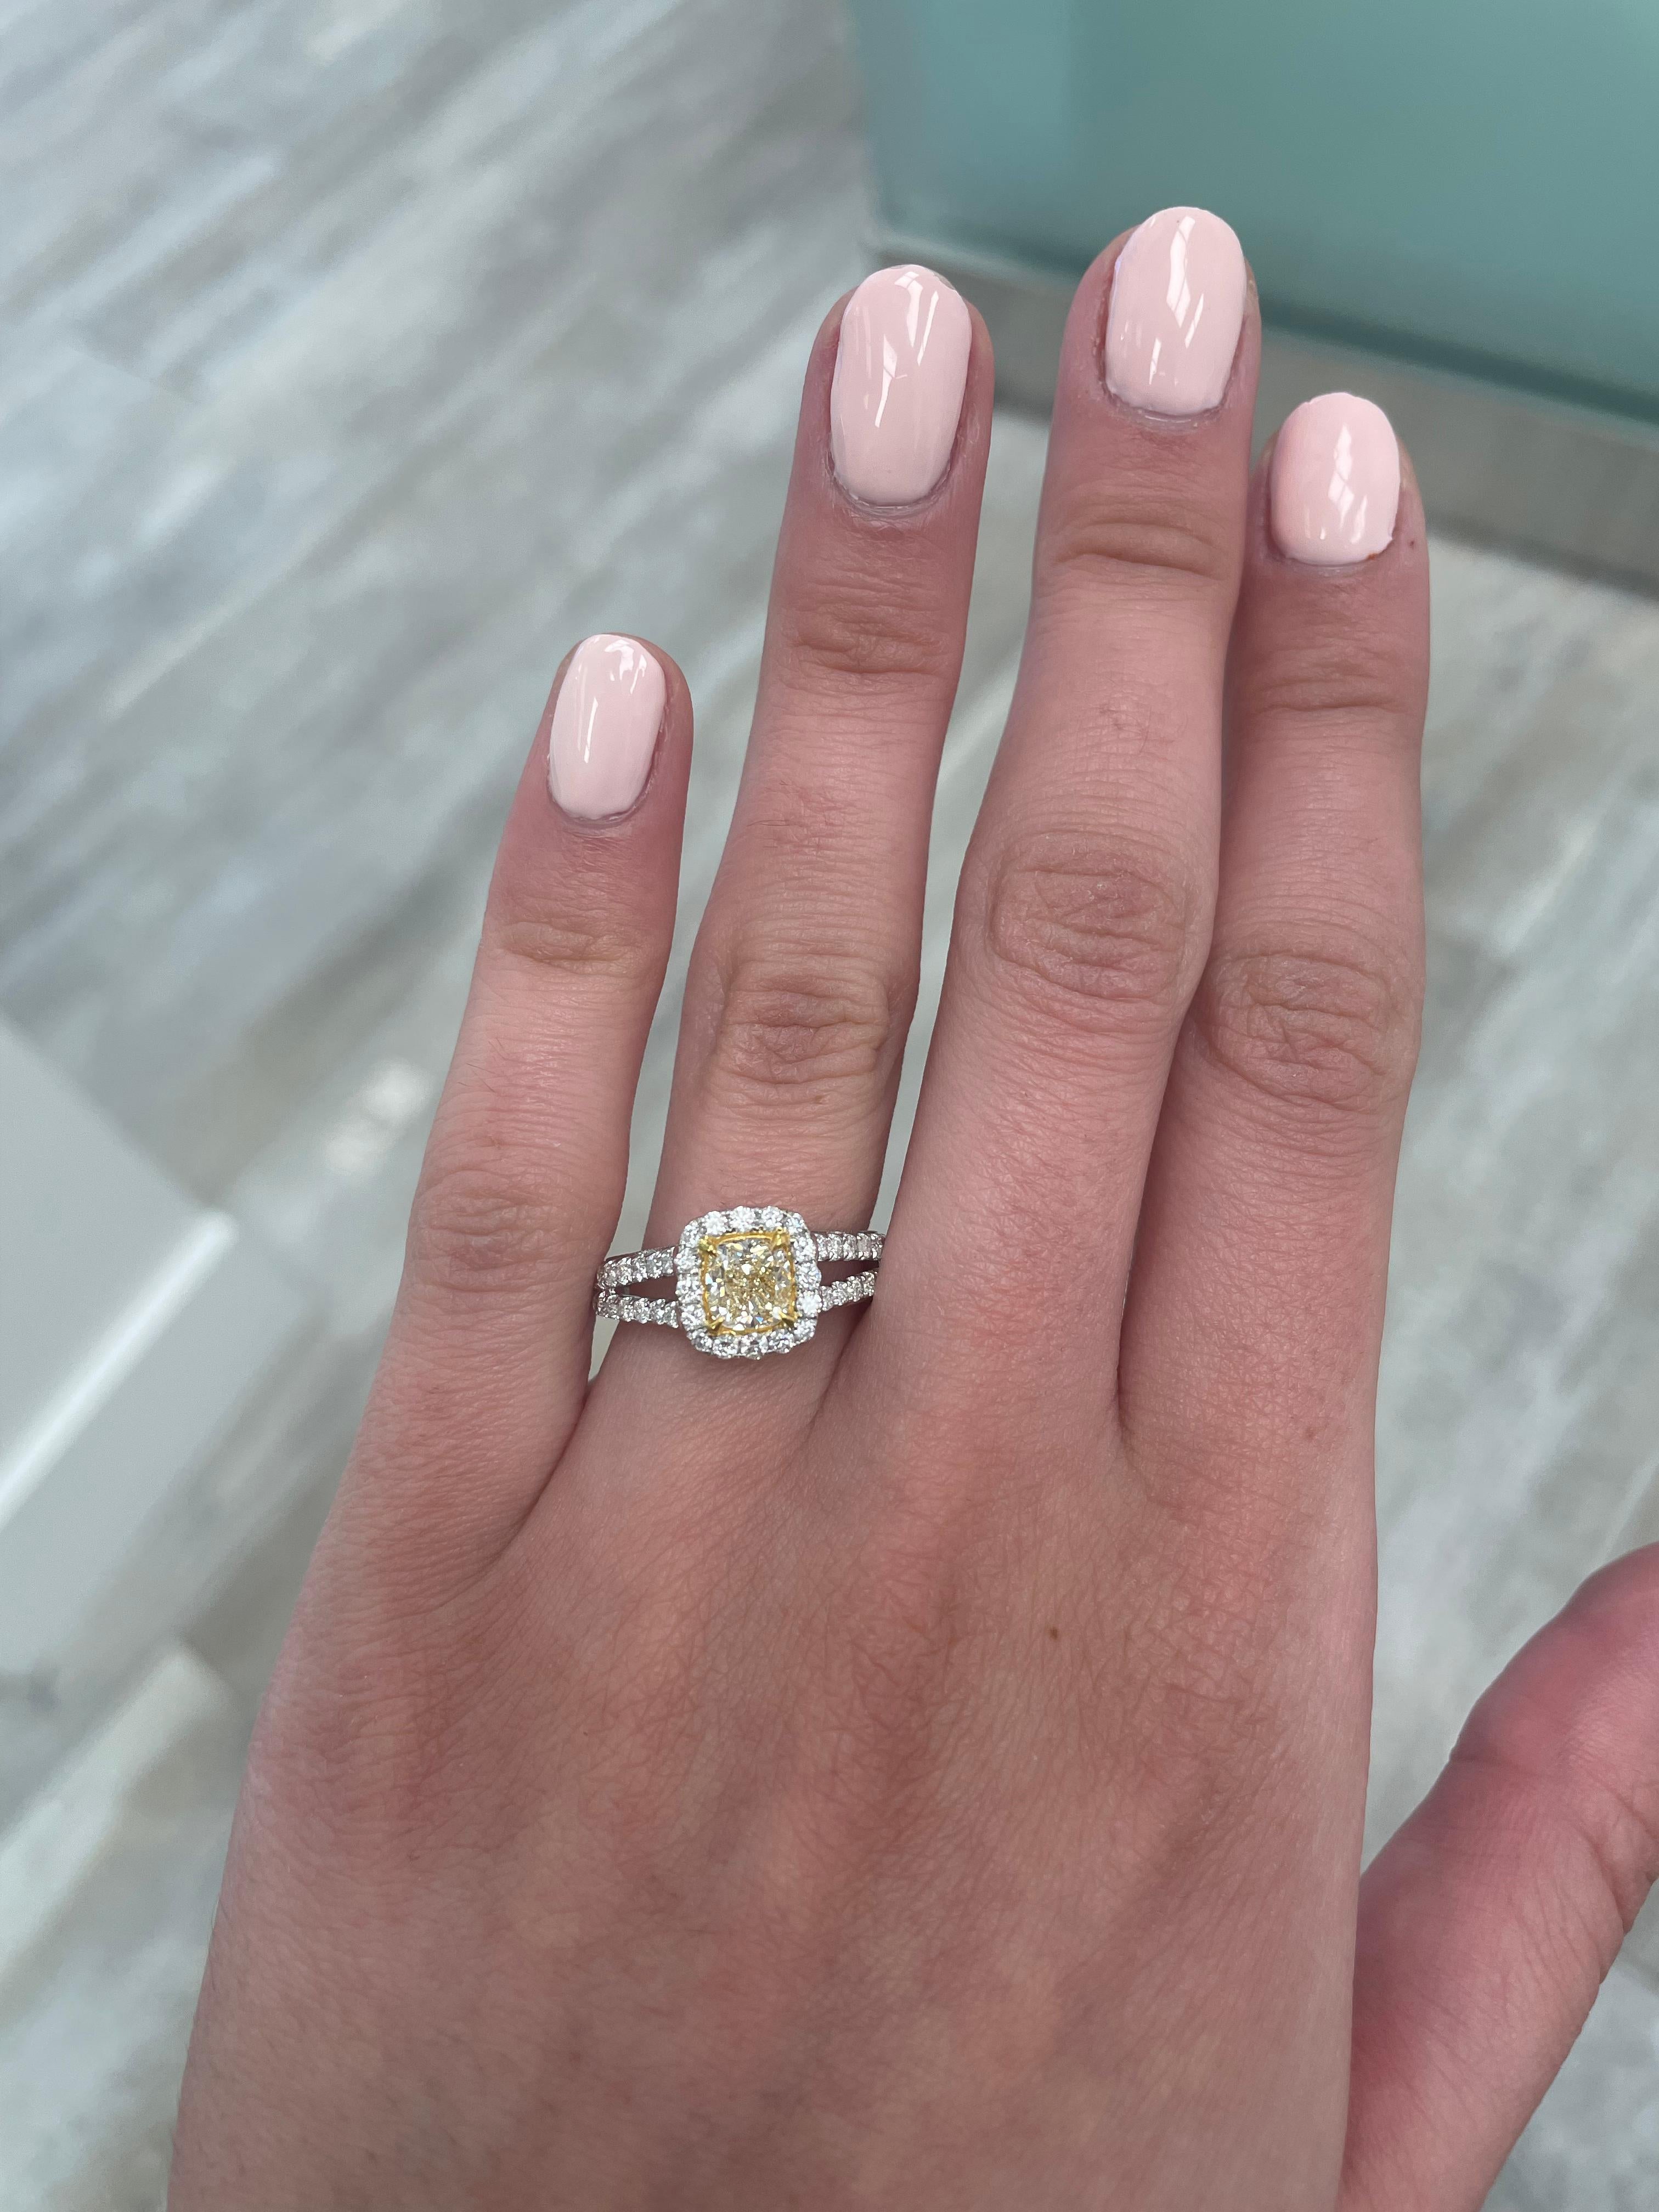 Stunning modern EGL certified yellow diamond with halo ring, two-tone 18k yellow and white gold, split shank. By Alexander Beverly Hills
1.70 carats total diamond weight.
1.01 carat cushion cut Fancy Light Yellow color and VS2 clarity diamond, EGL